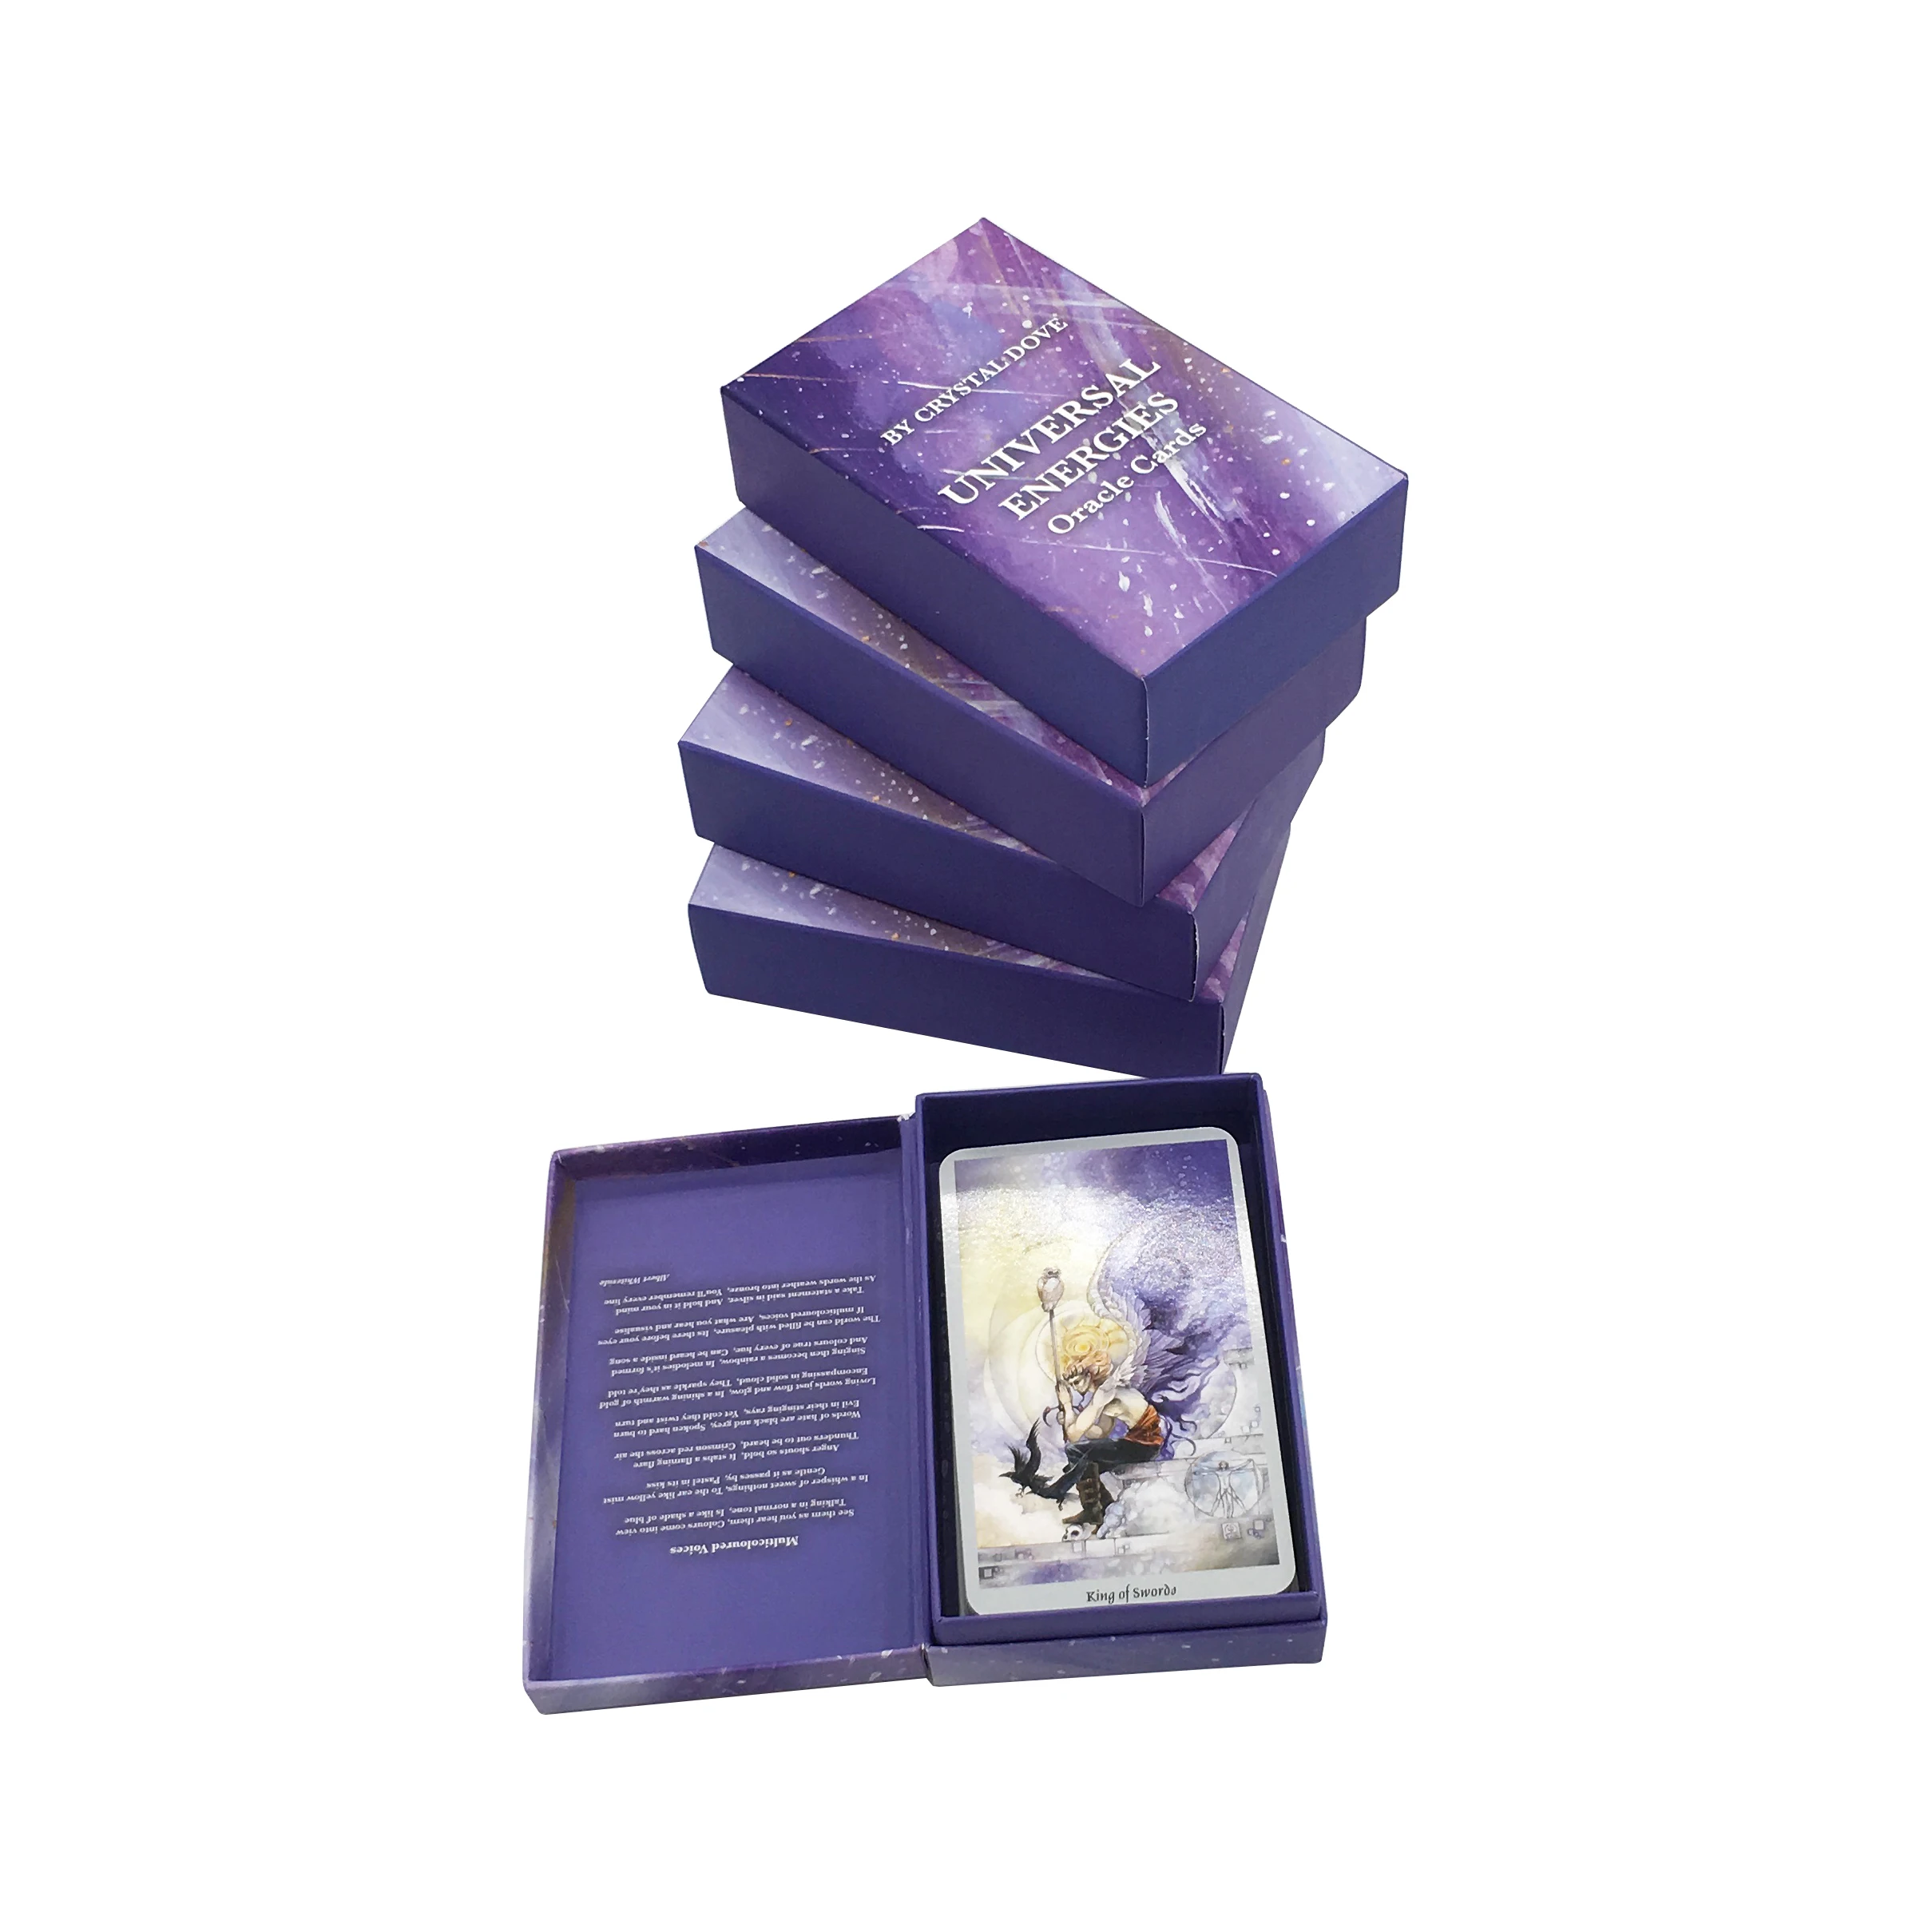 

Custom card deck gold edges tarot cards with full color for wholesale retail, Full color( cmyk & spot color)